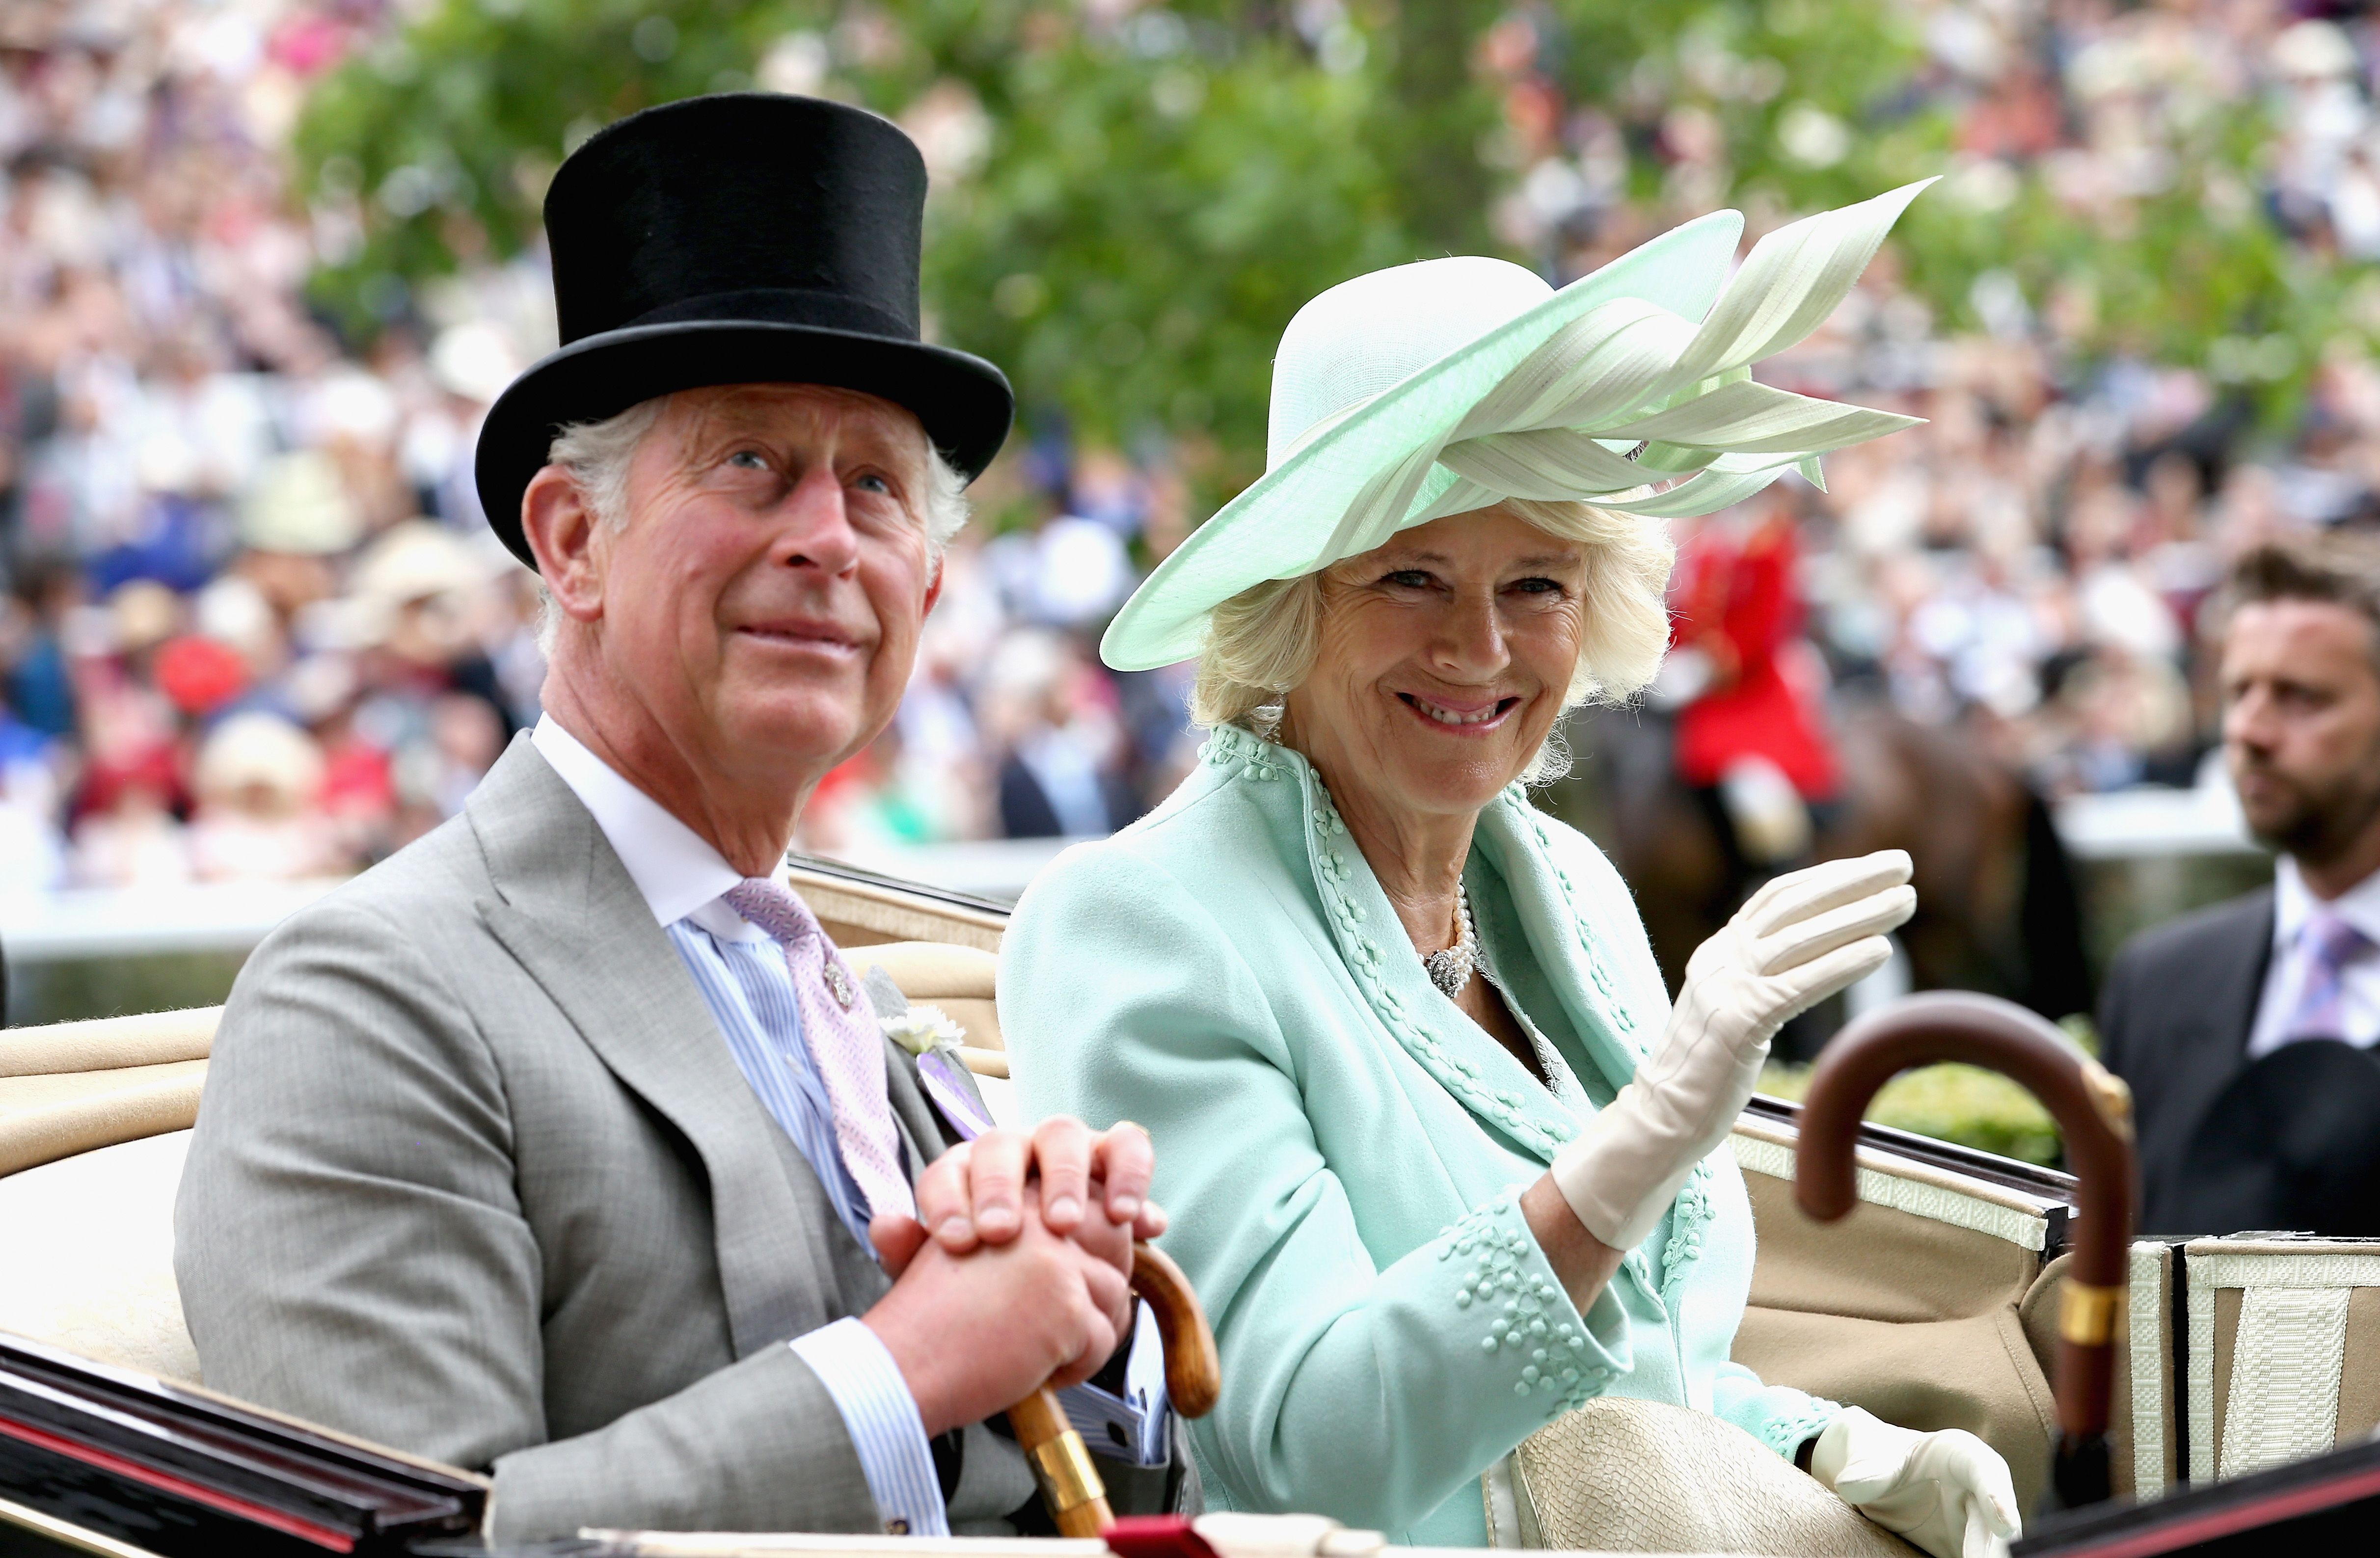 Prince Charles and Camilla during the parade ring on day 1 of Royal Ascot at Ascot Racecourse on June 16, 2015 in Ascot, England. | Source: Getty Images